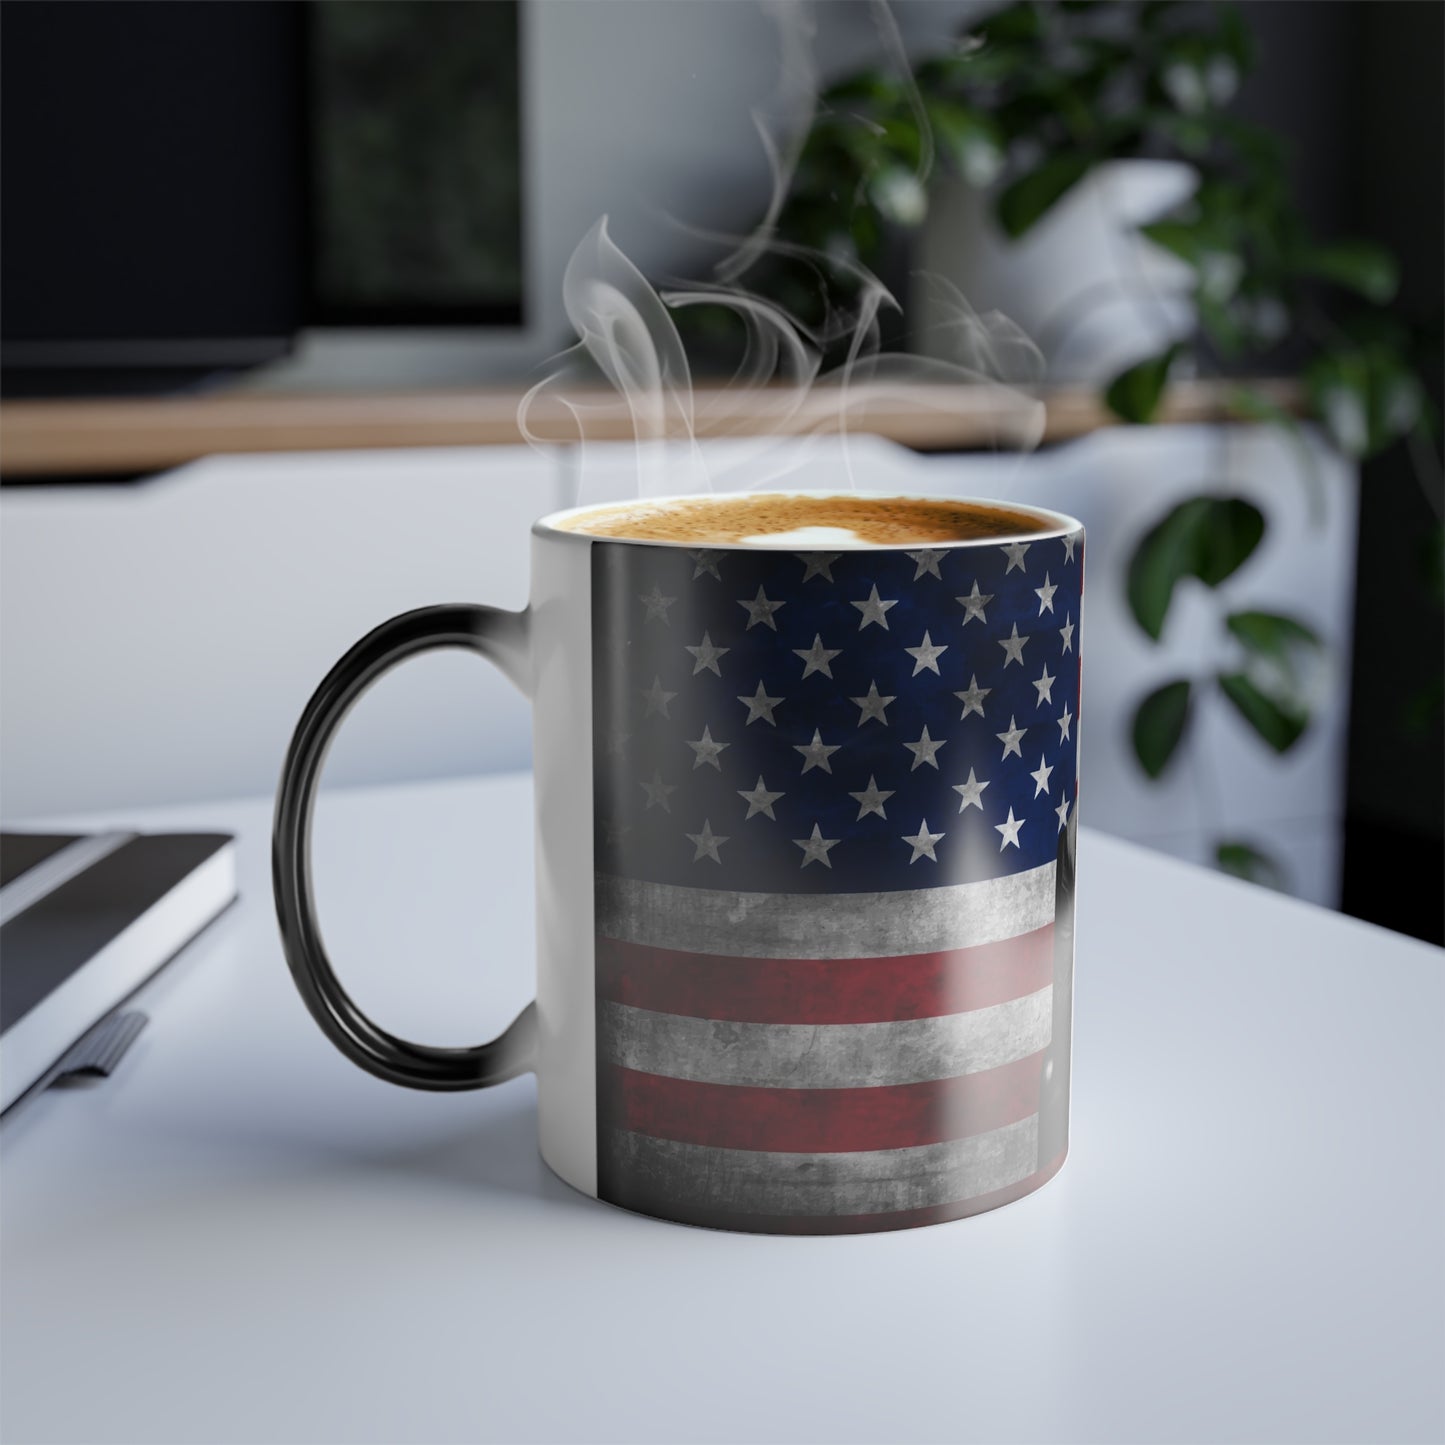 Color Morphing Trump with Gun 2A American Flag Heat Reacting See Pictures Coffee Mug 11oz